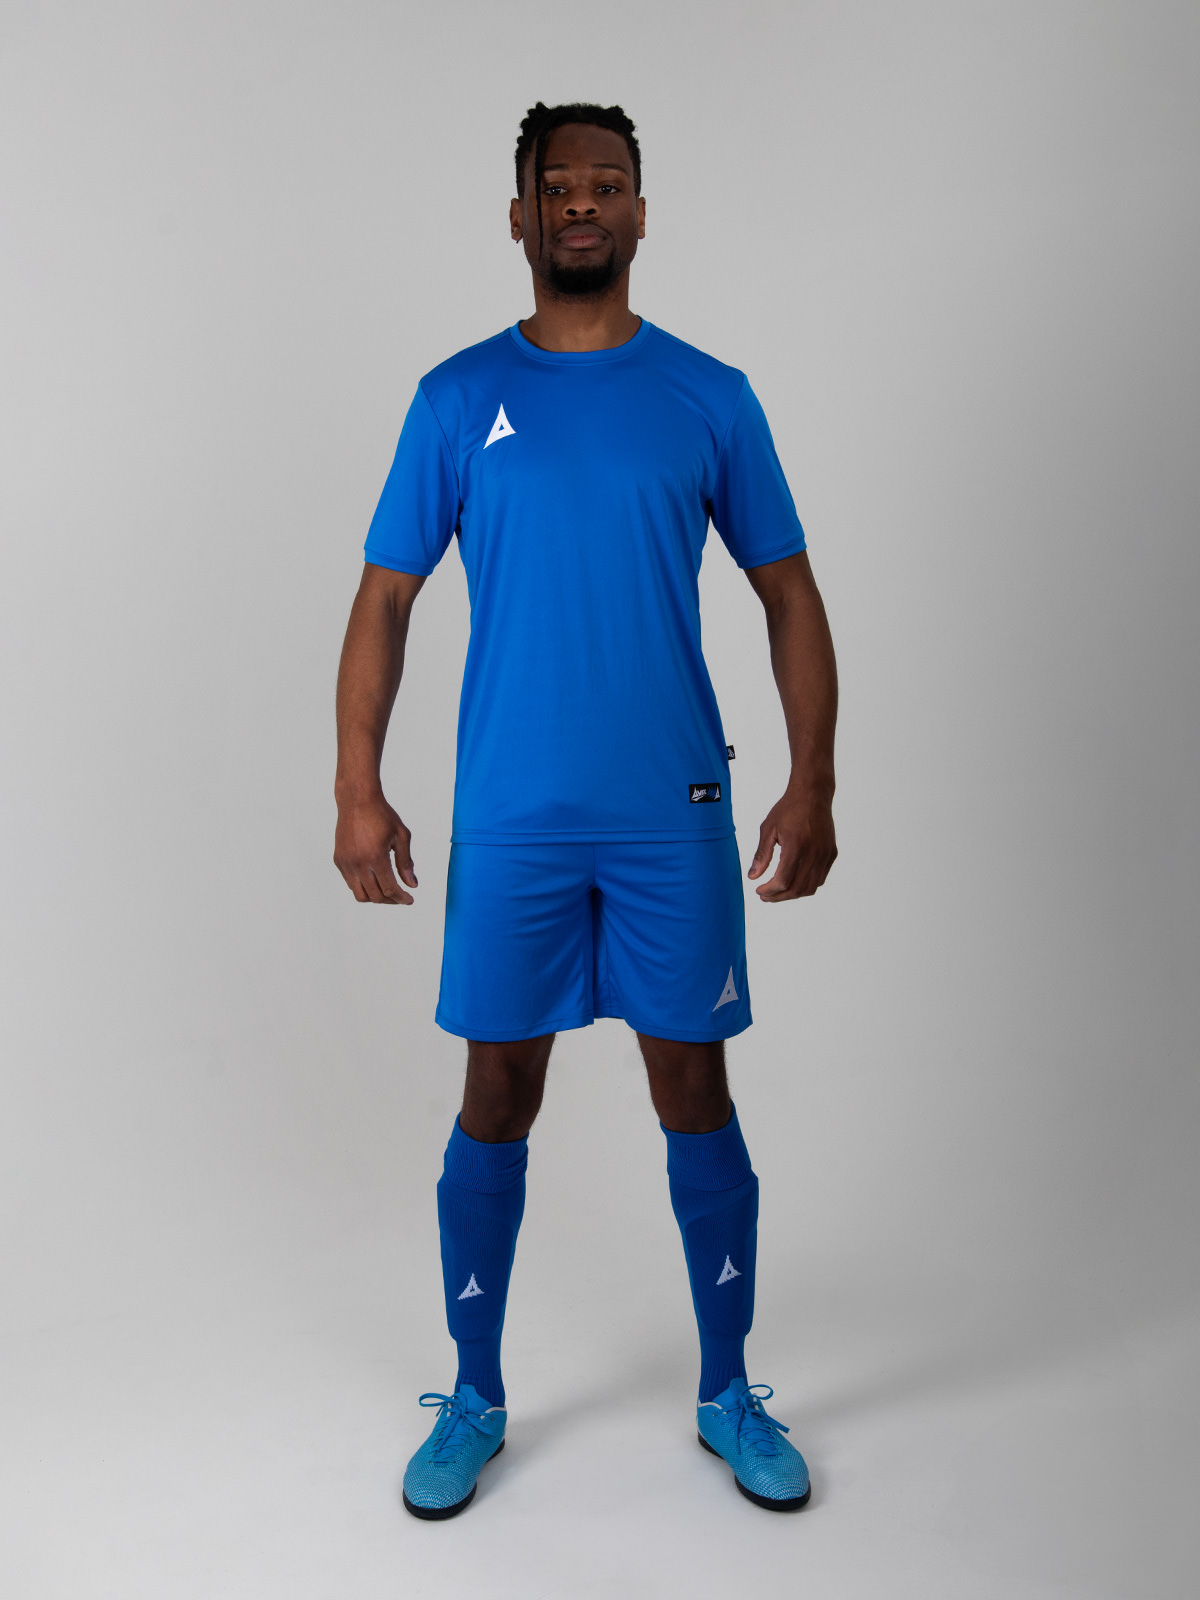 a person is wearing a royal football kit which consists of blue football shirts and shirt.